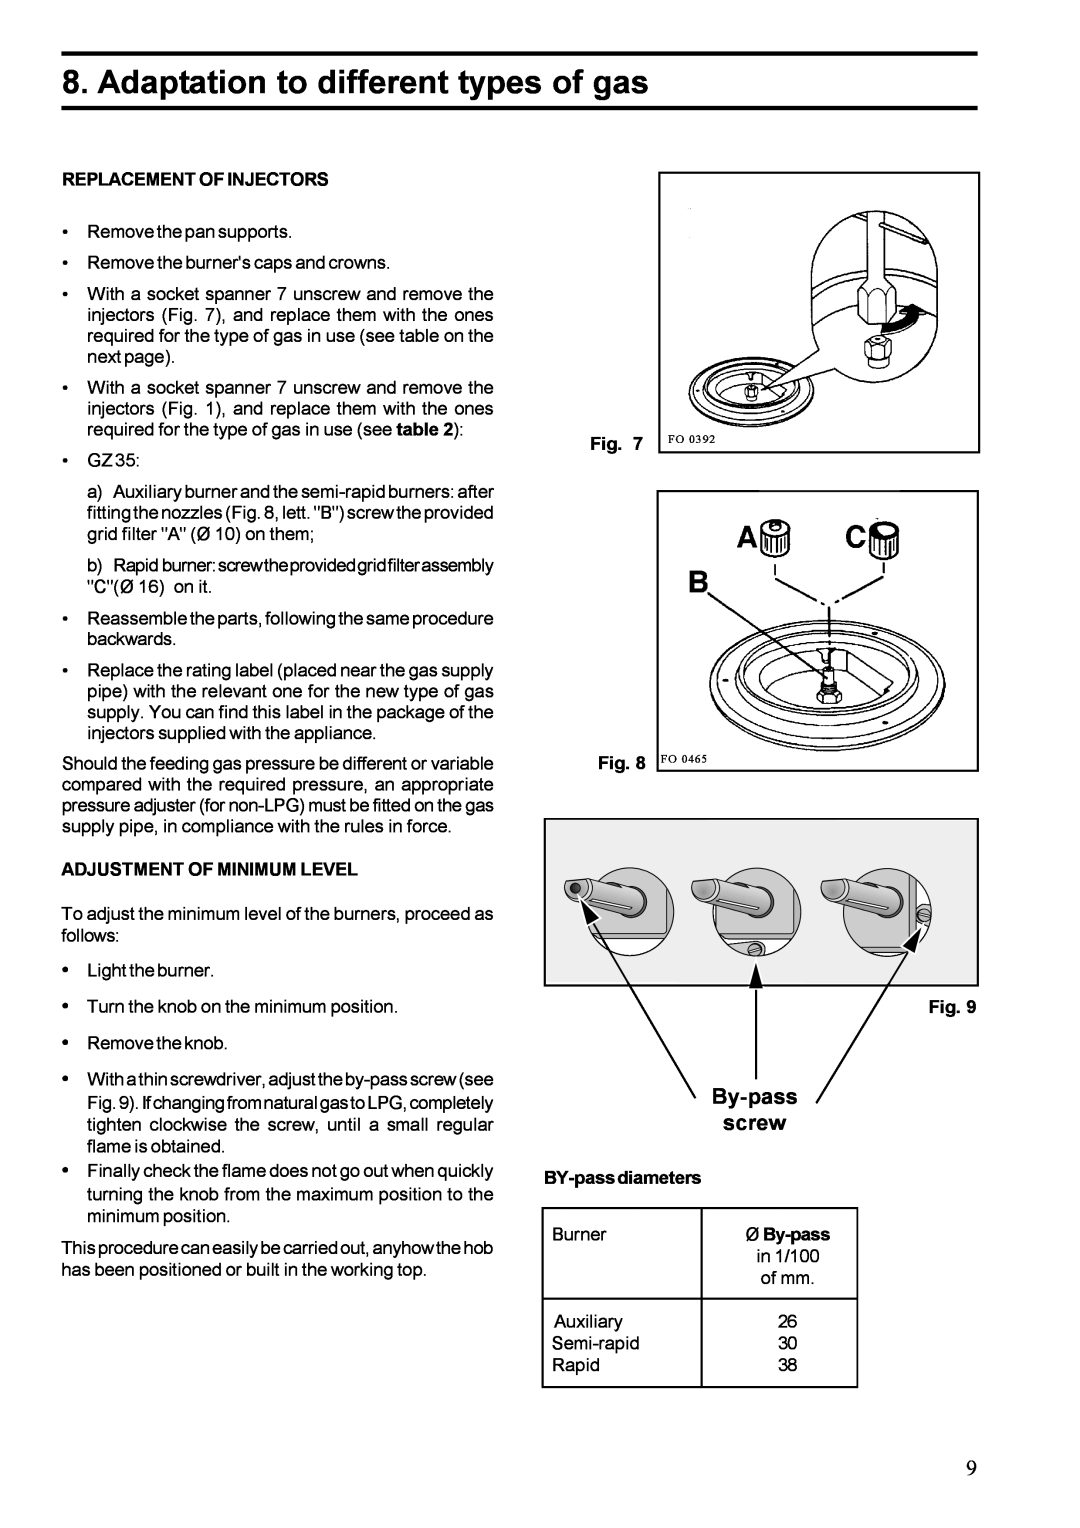 Zanussi ZGF 647 installation manual Adaptation to different types of gas, By-pass screw 